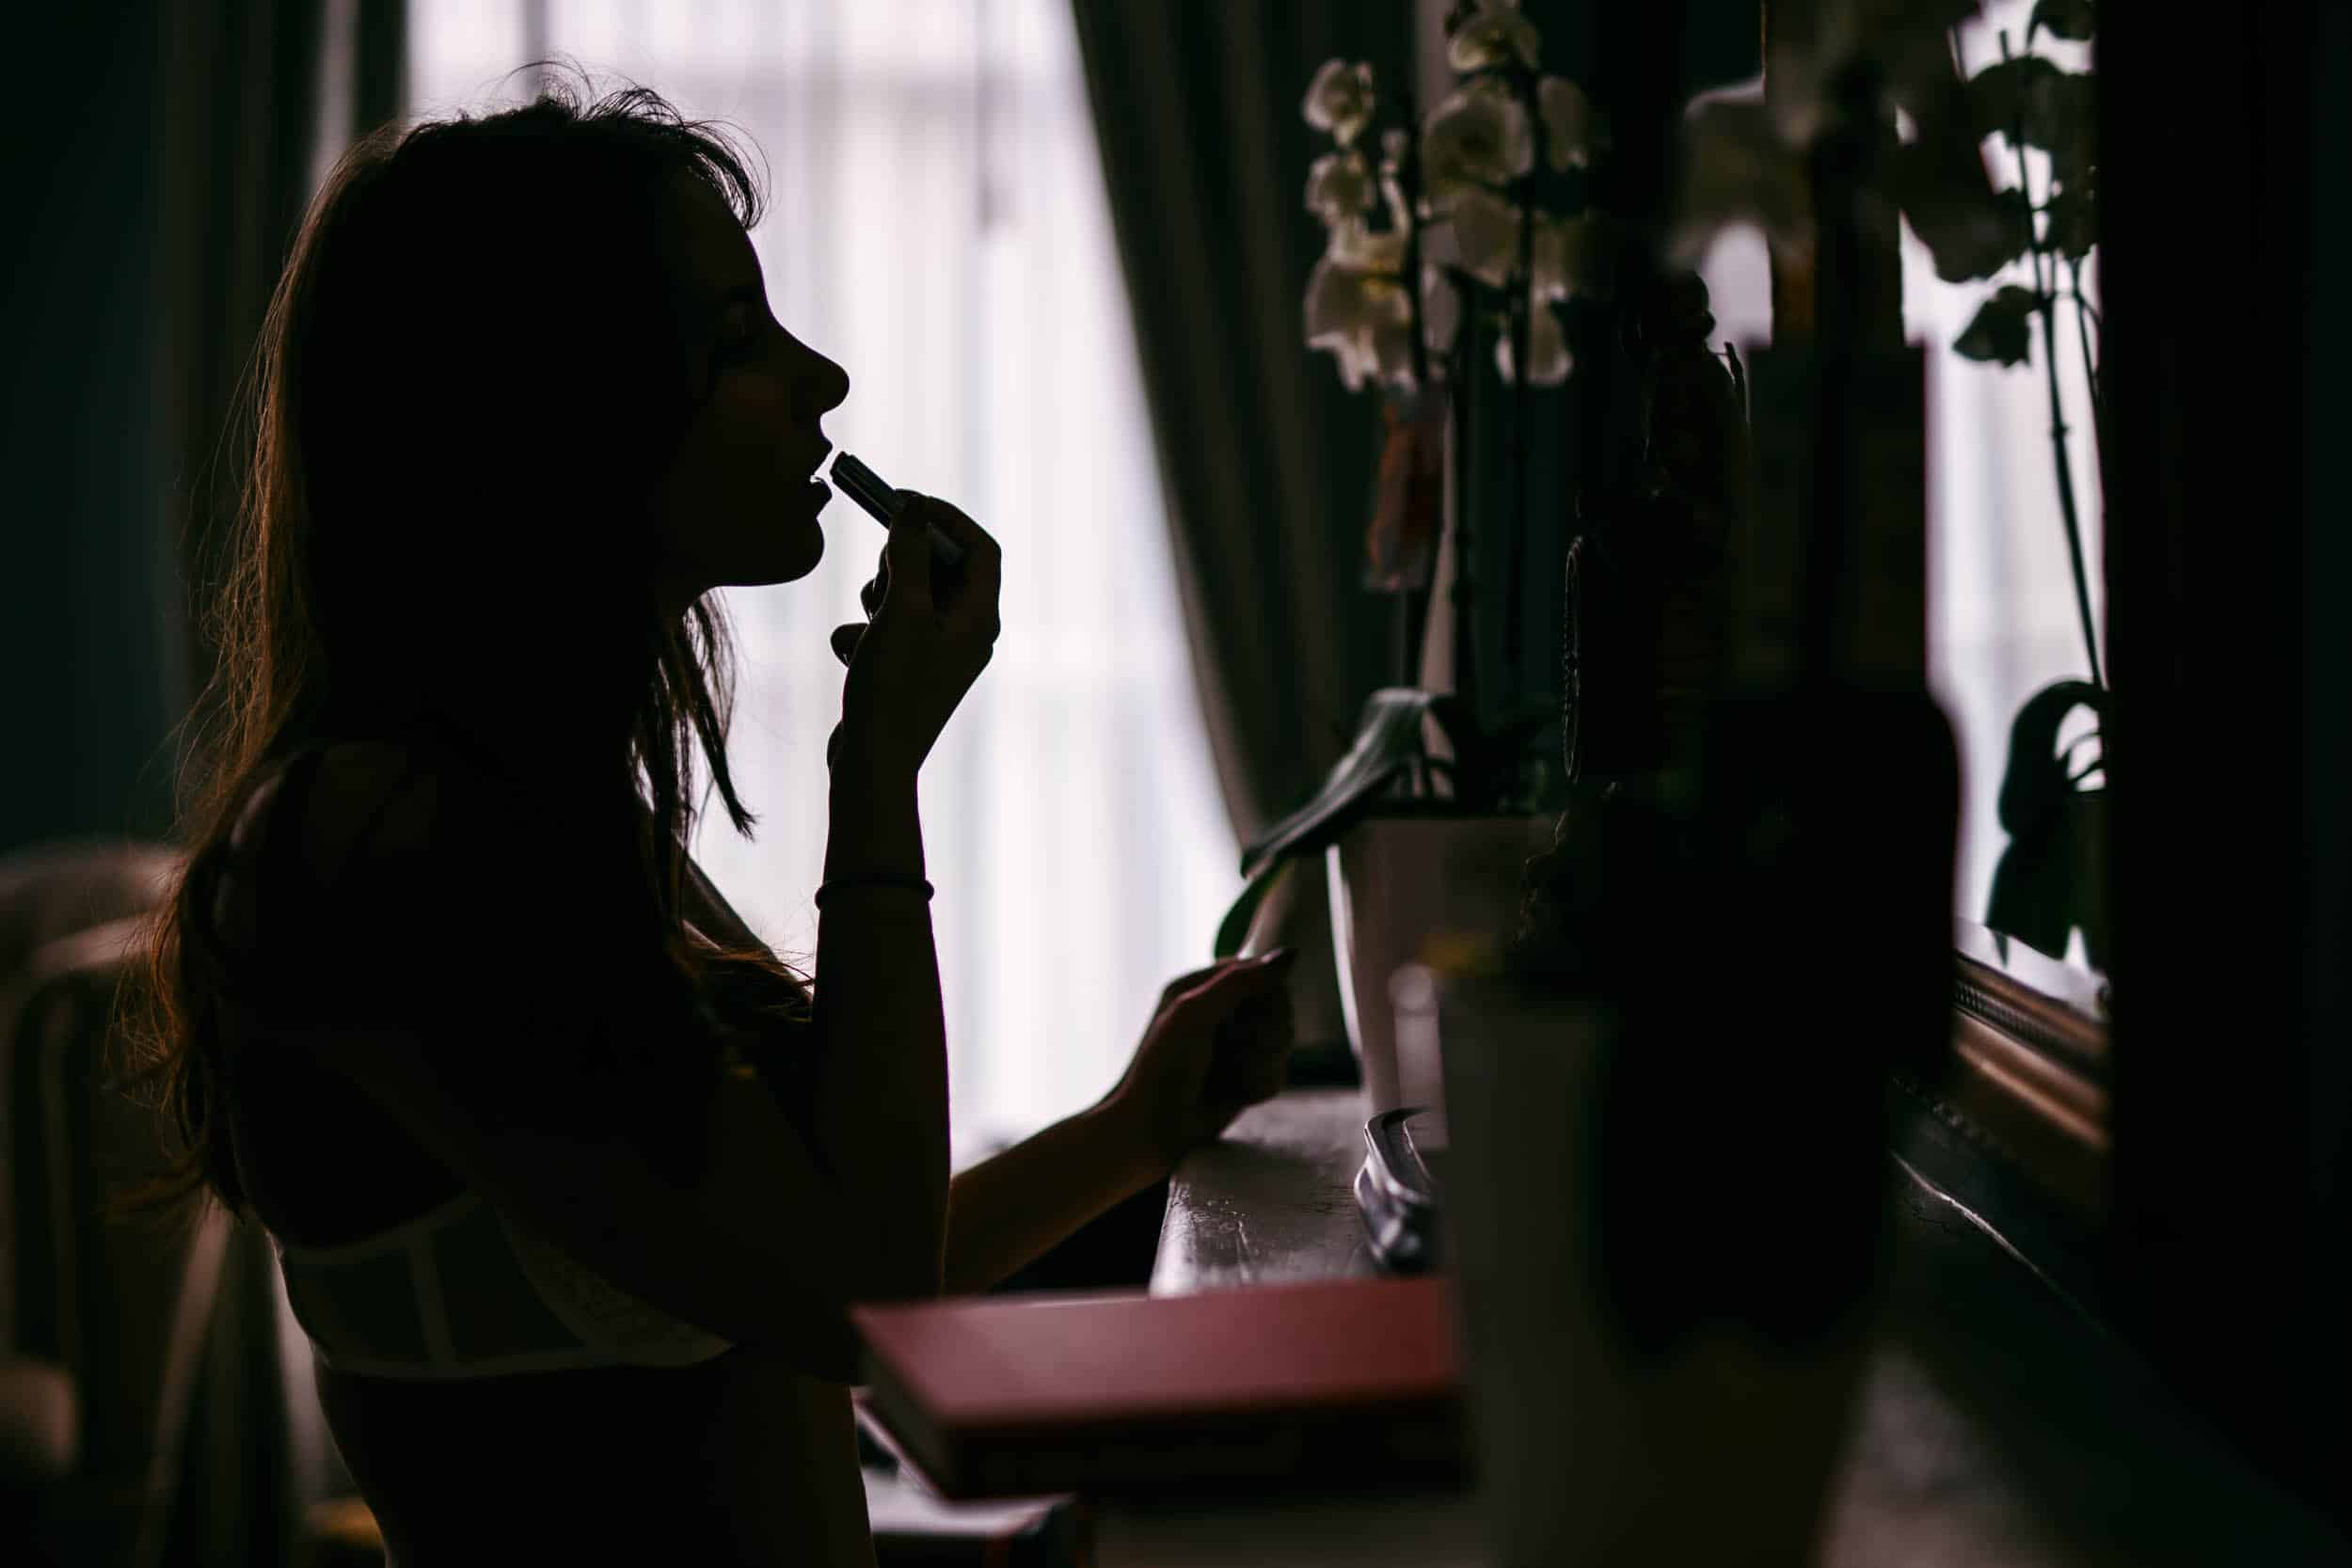 A woman brushes her teeth in front of a boudoir mirror.